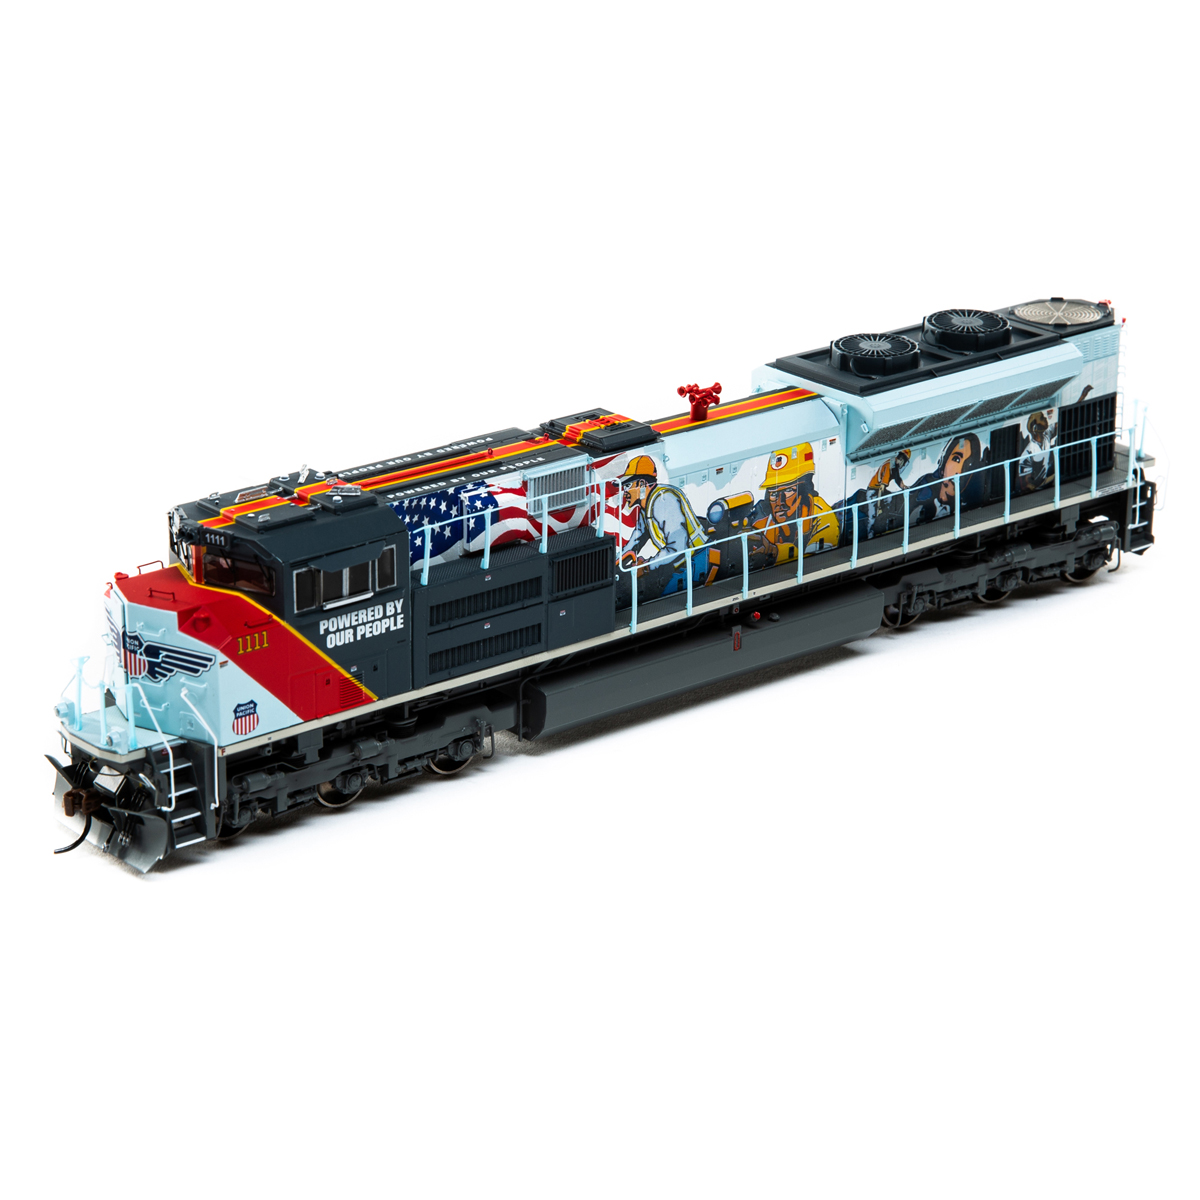 for sale online ATHG01943 Athearn Genesis EMD SD70ACe Spirit of Union Pacific 1943 HO Scale Diesel Locomotive with DCC and Sound